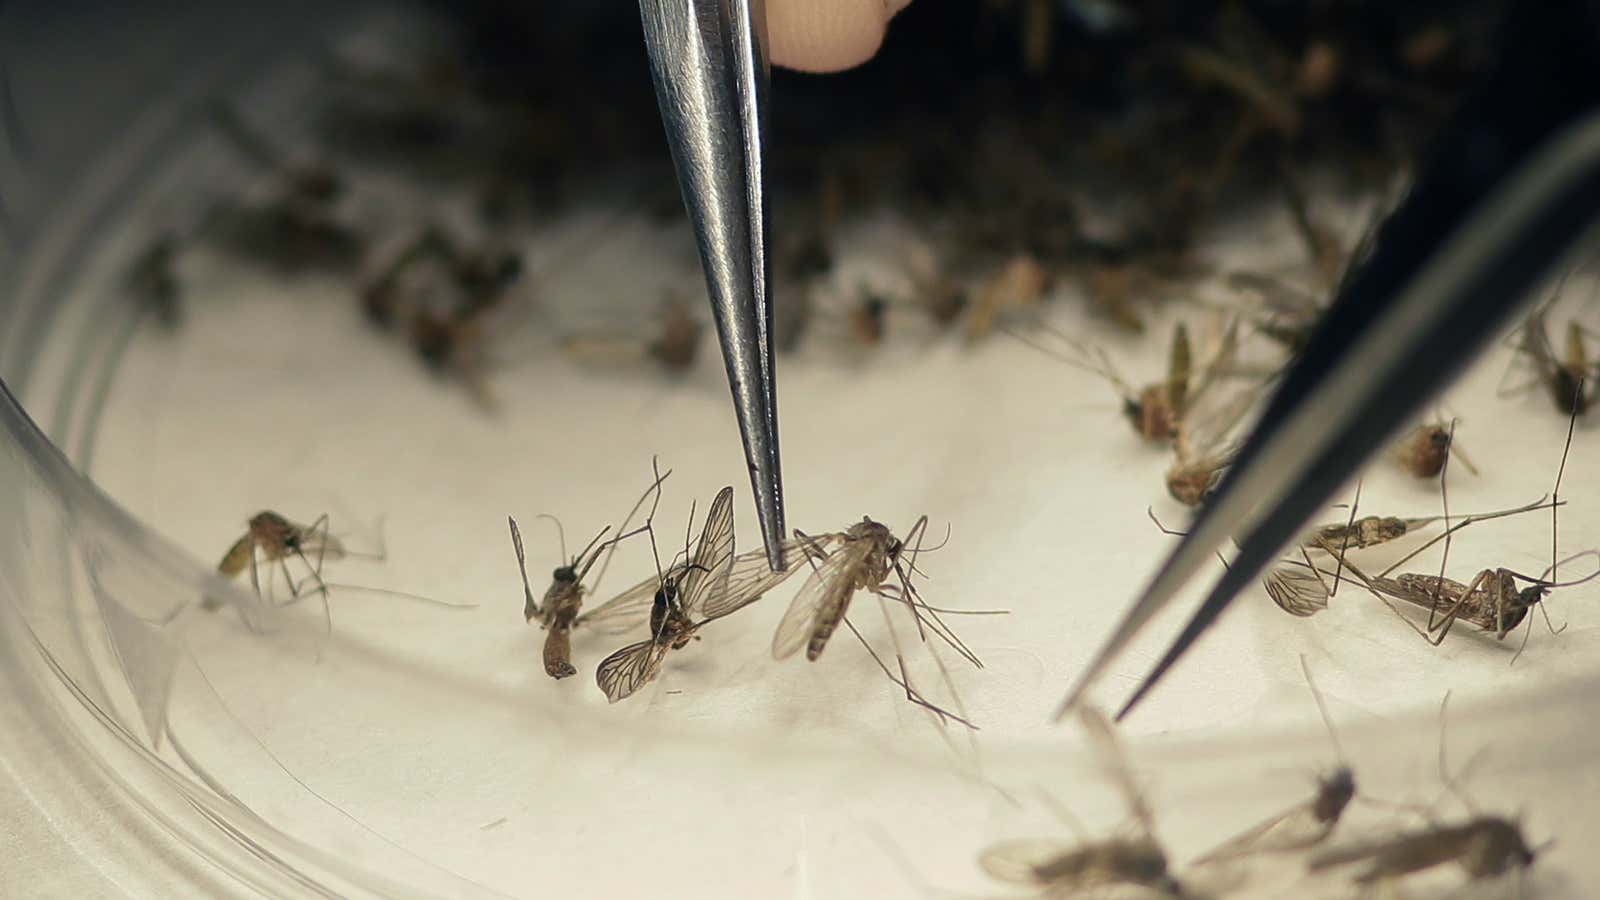 A microbiologist sorts mosquitos that may be carrying the virus.